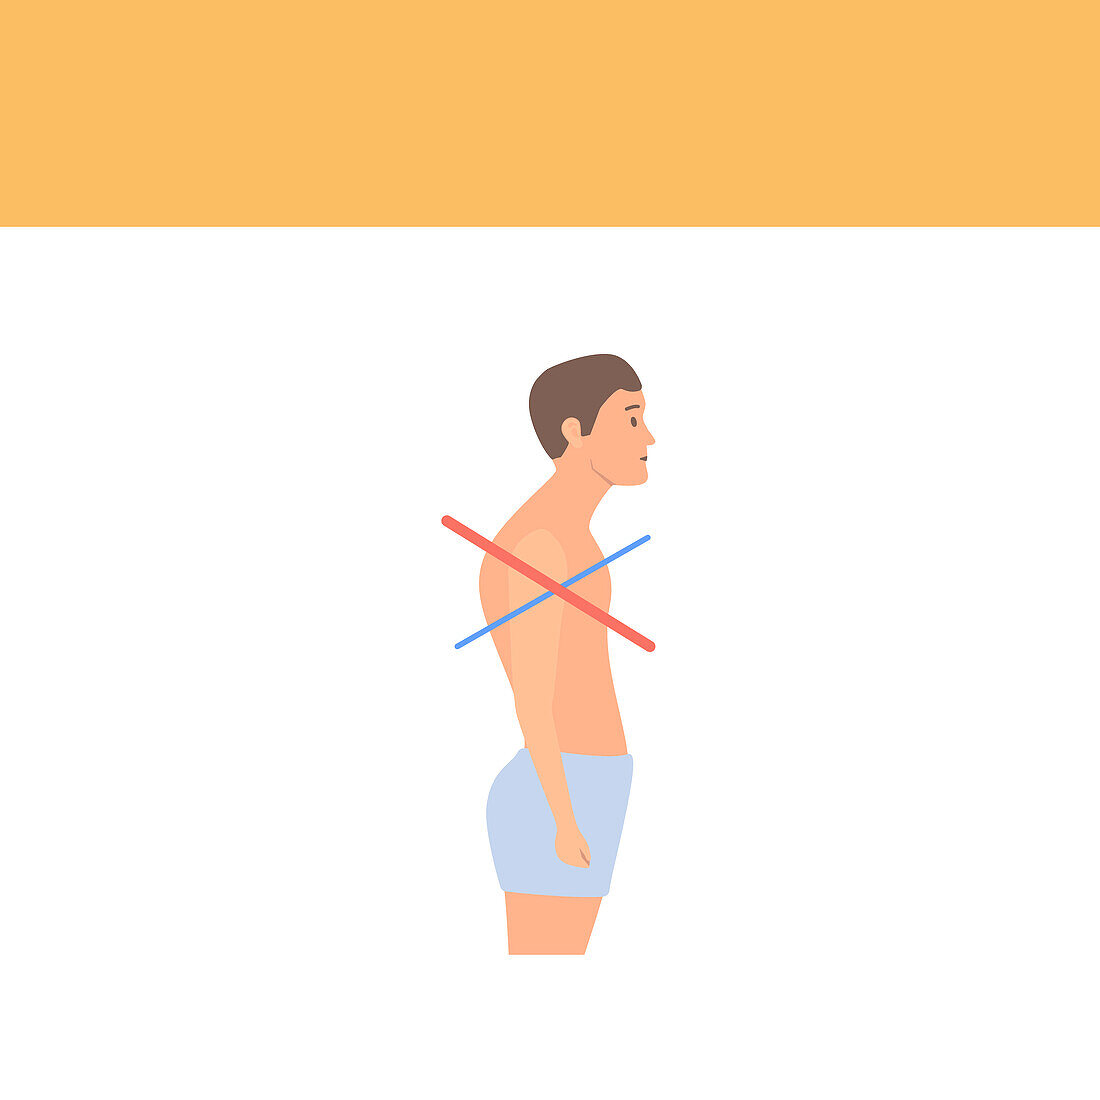 Upper crossed syndrome, conceptual illustration